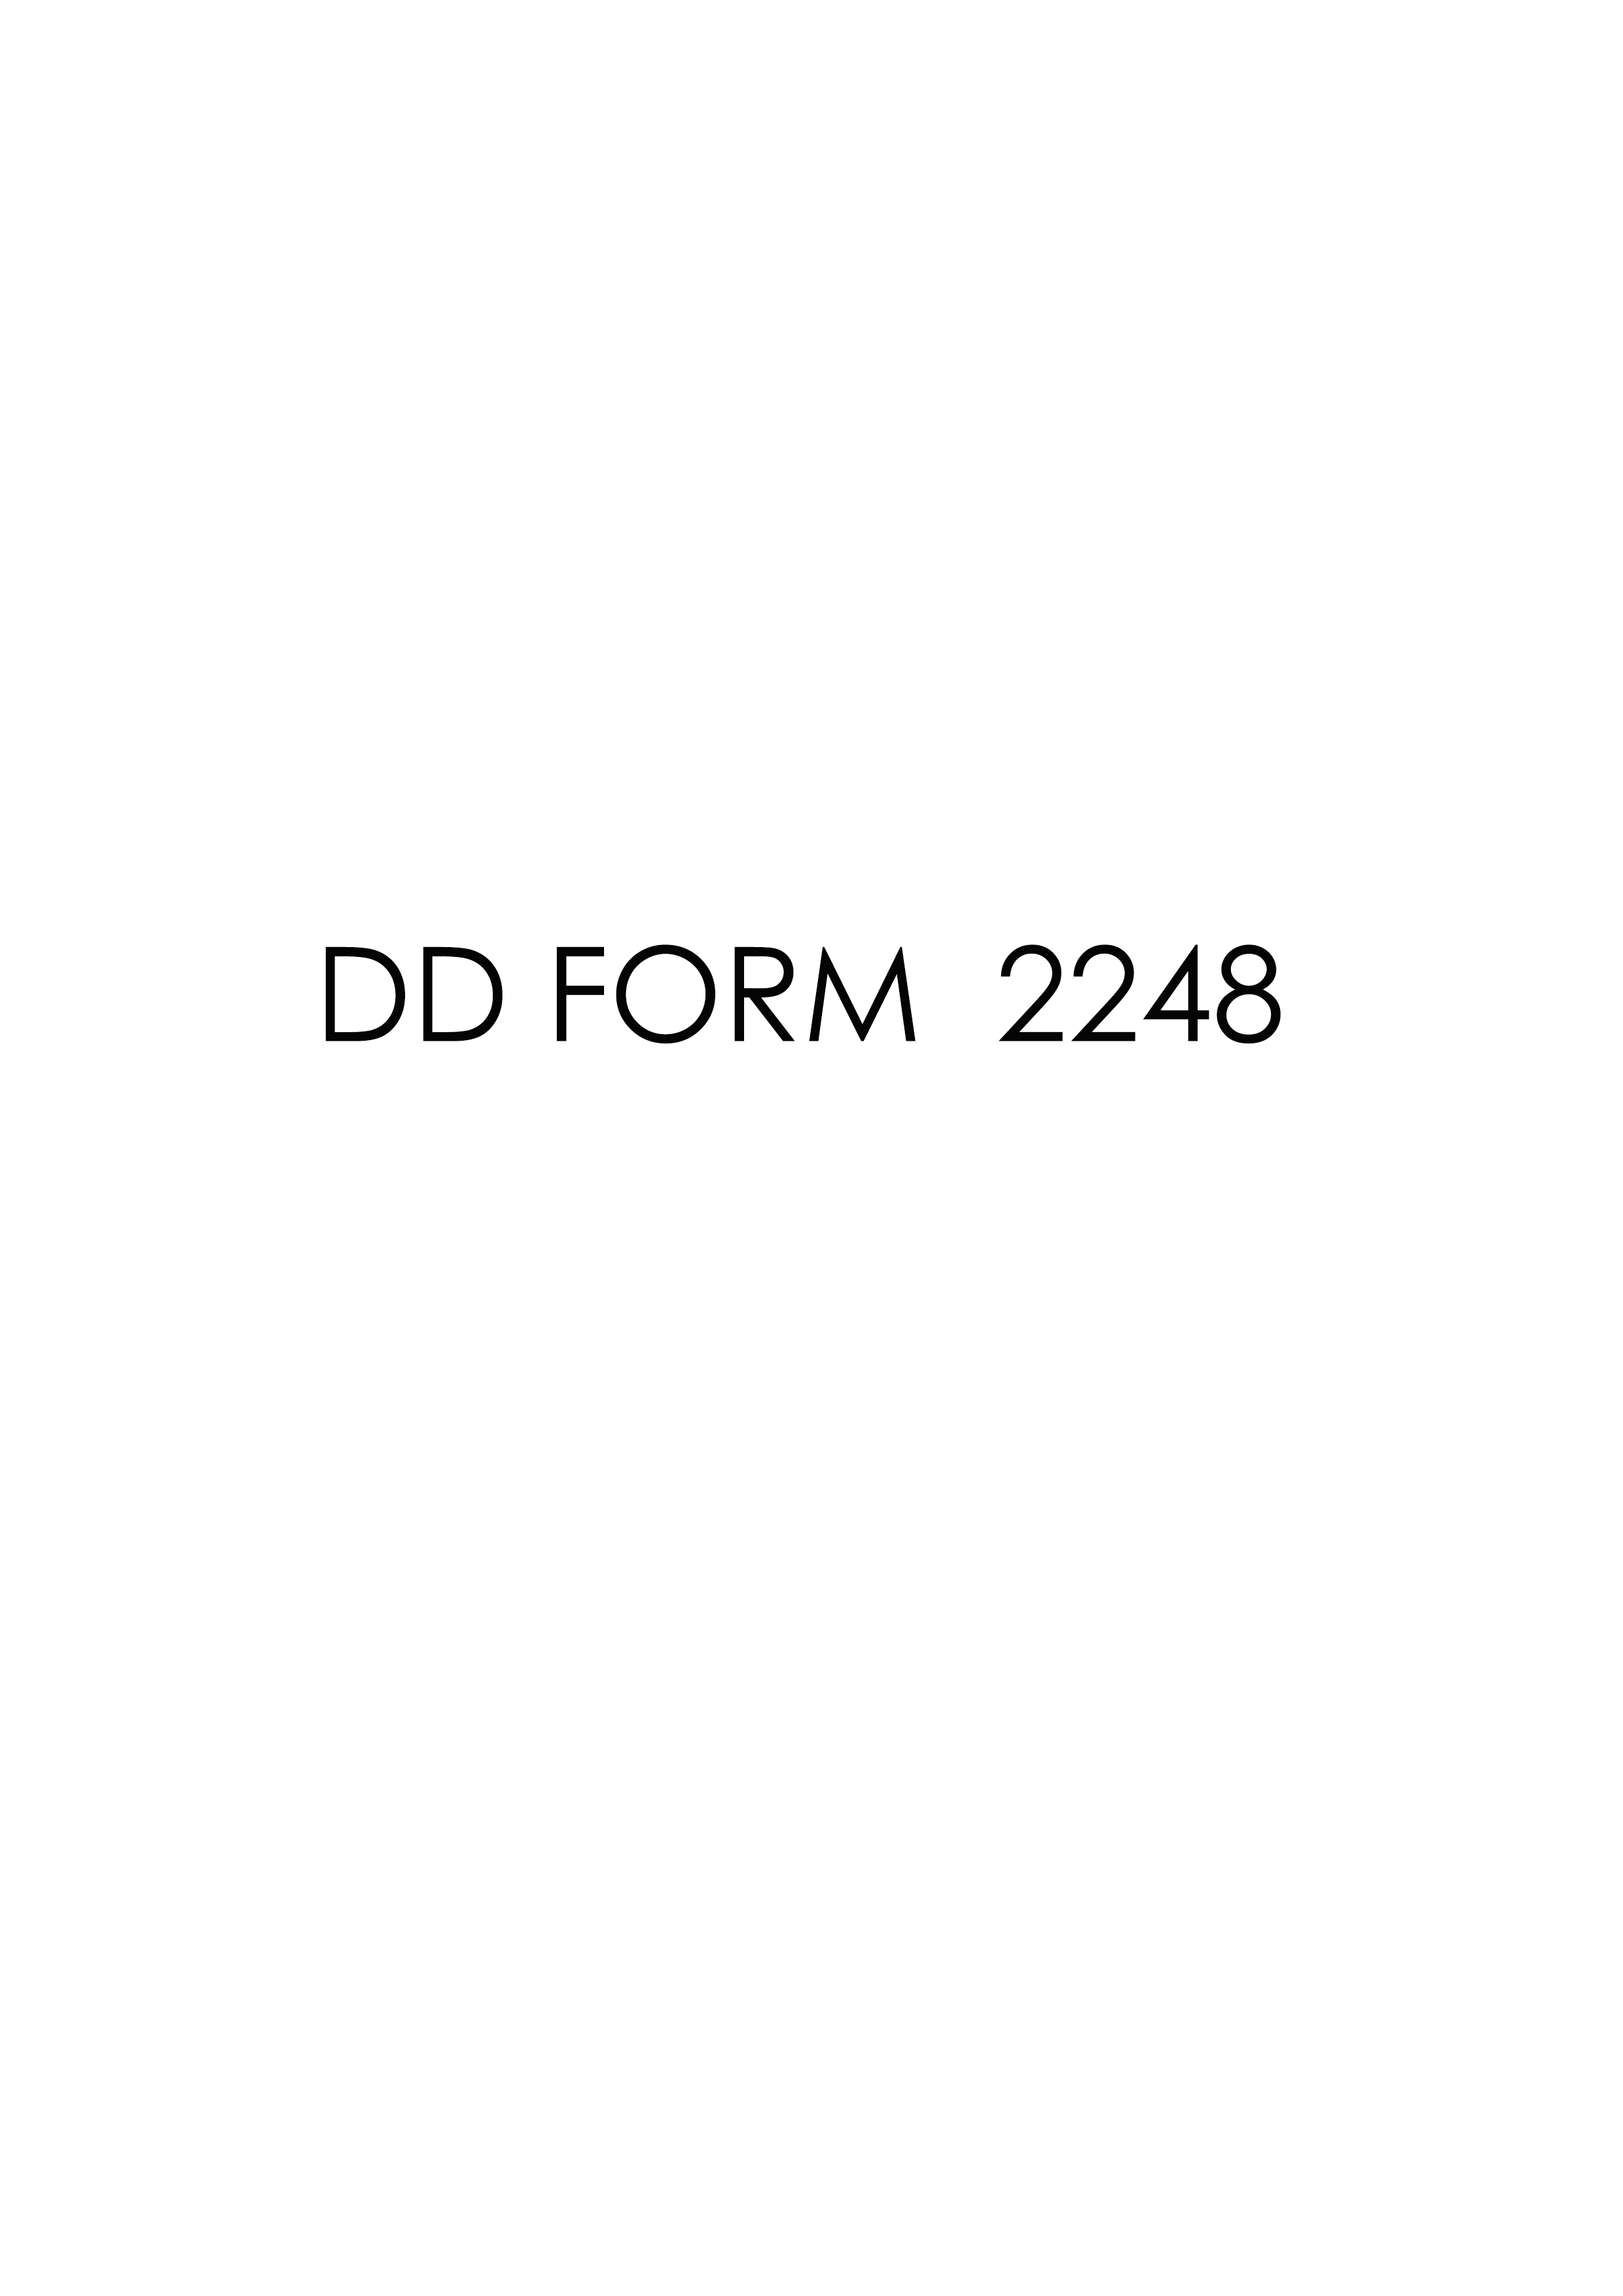 Download Fillable dd Form 2248